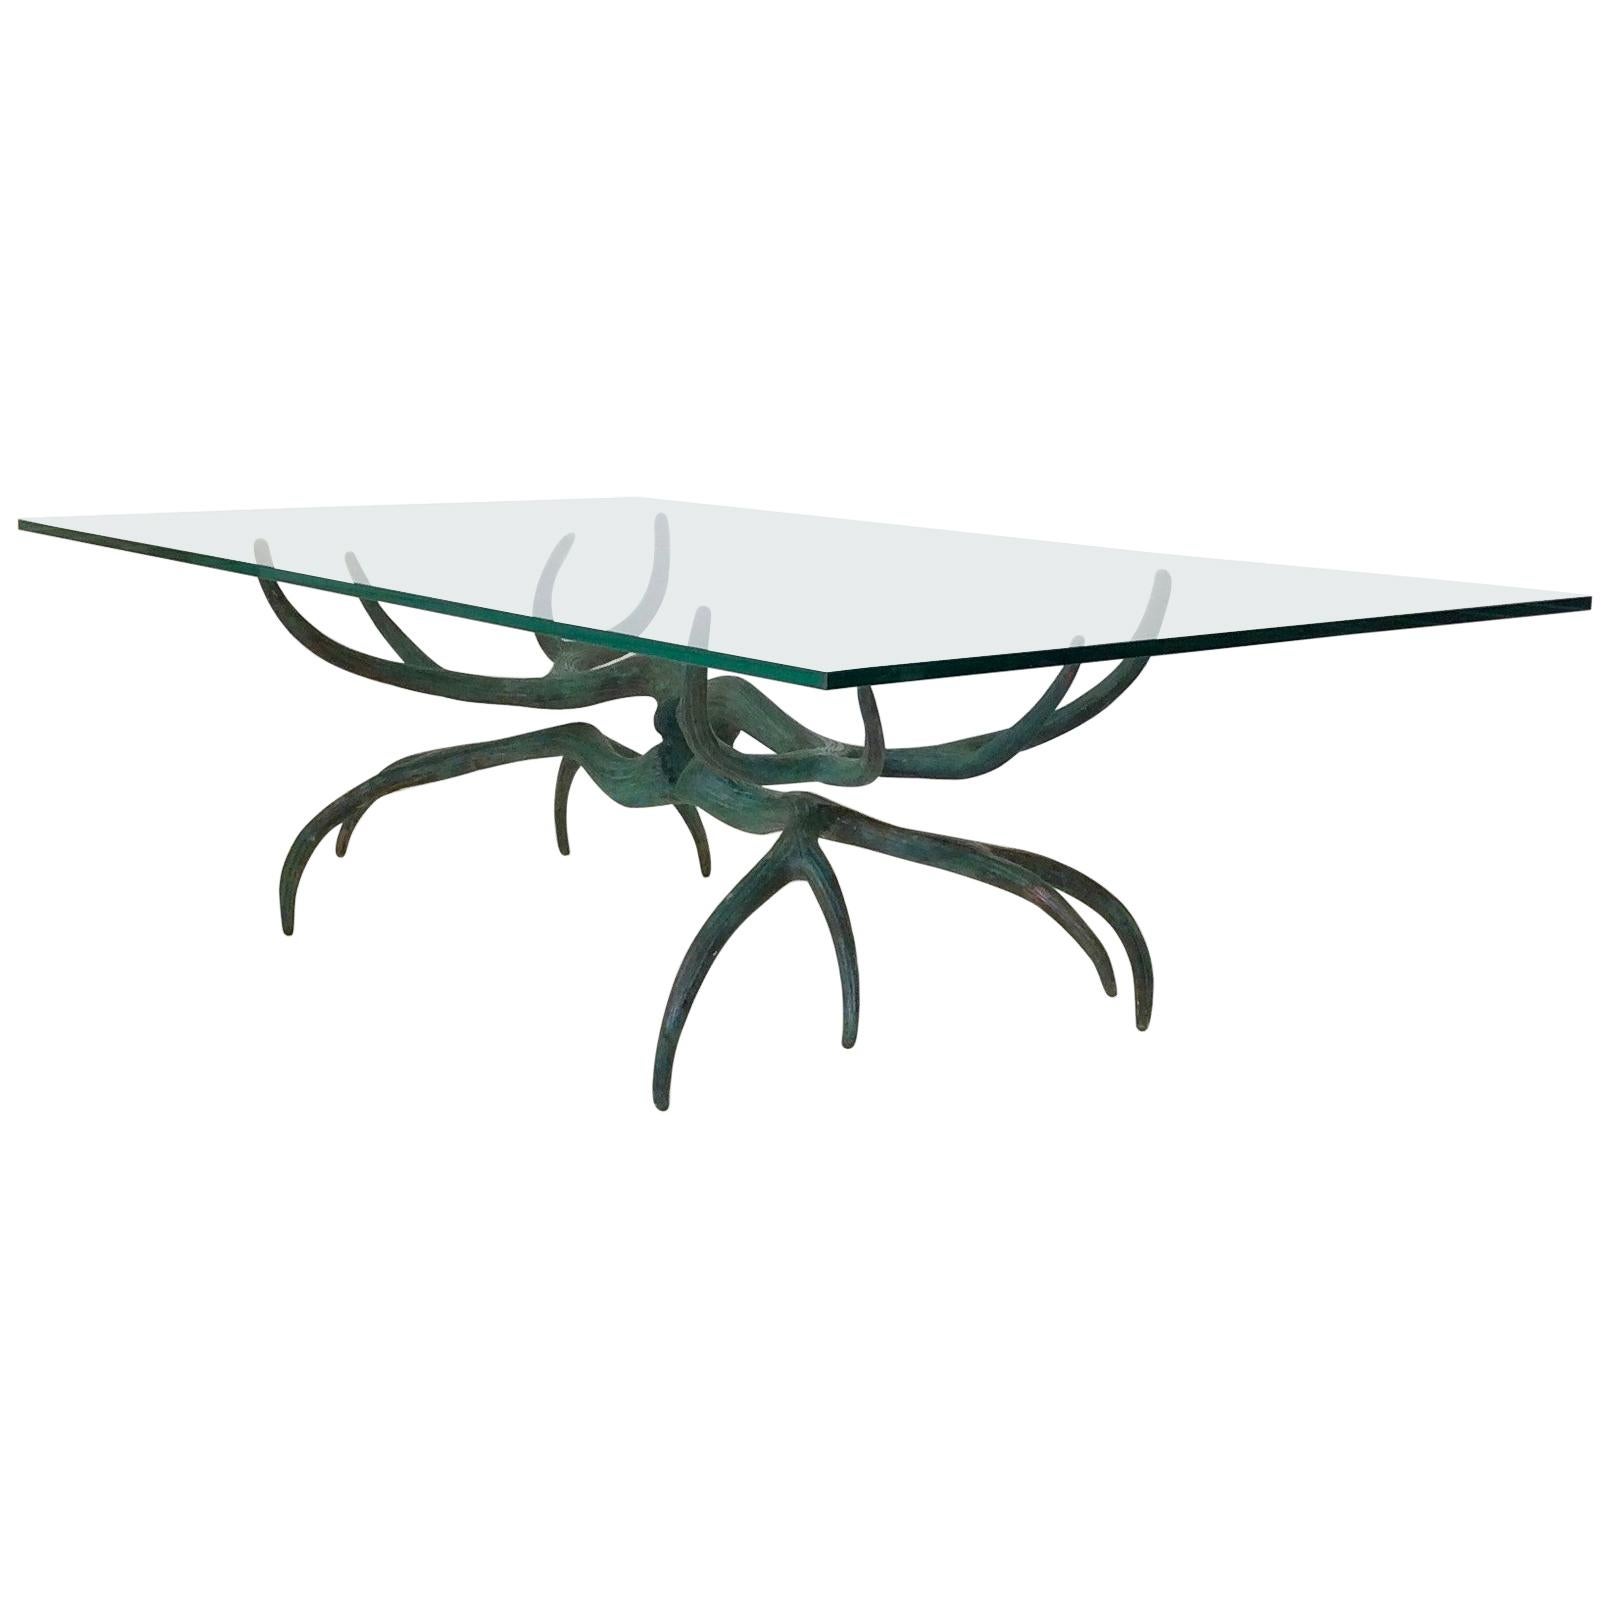 Sculptural deer antlers bronze coffee table, circa 1970, France.
Patinated bronze and rectangular clear glass top.
Dimensions: 140 cm W, 76 cm D, 42 cm H. Glass 16 mm thick.
Good original condition.
All purchases are covered by our Buyer Protection